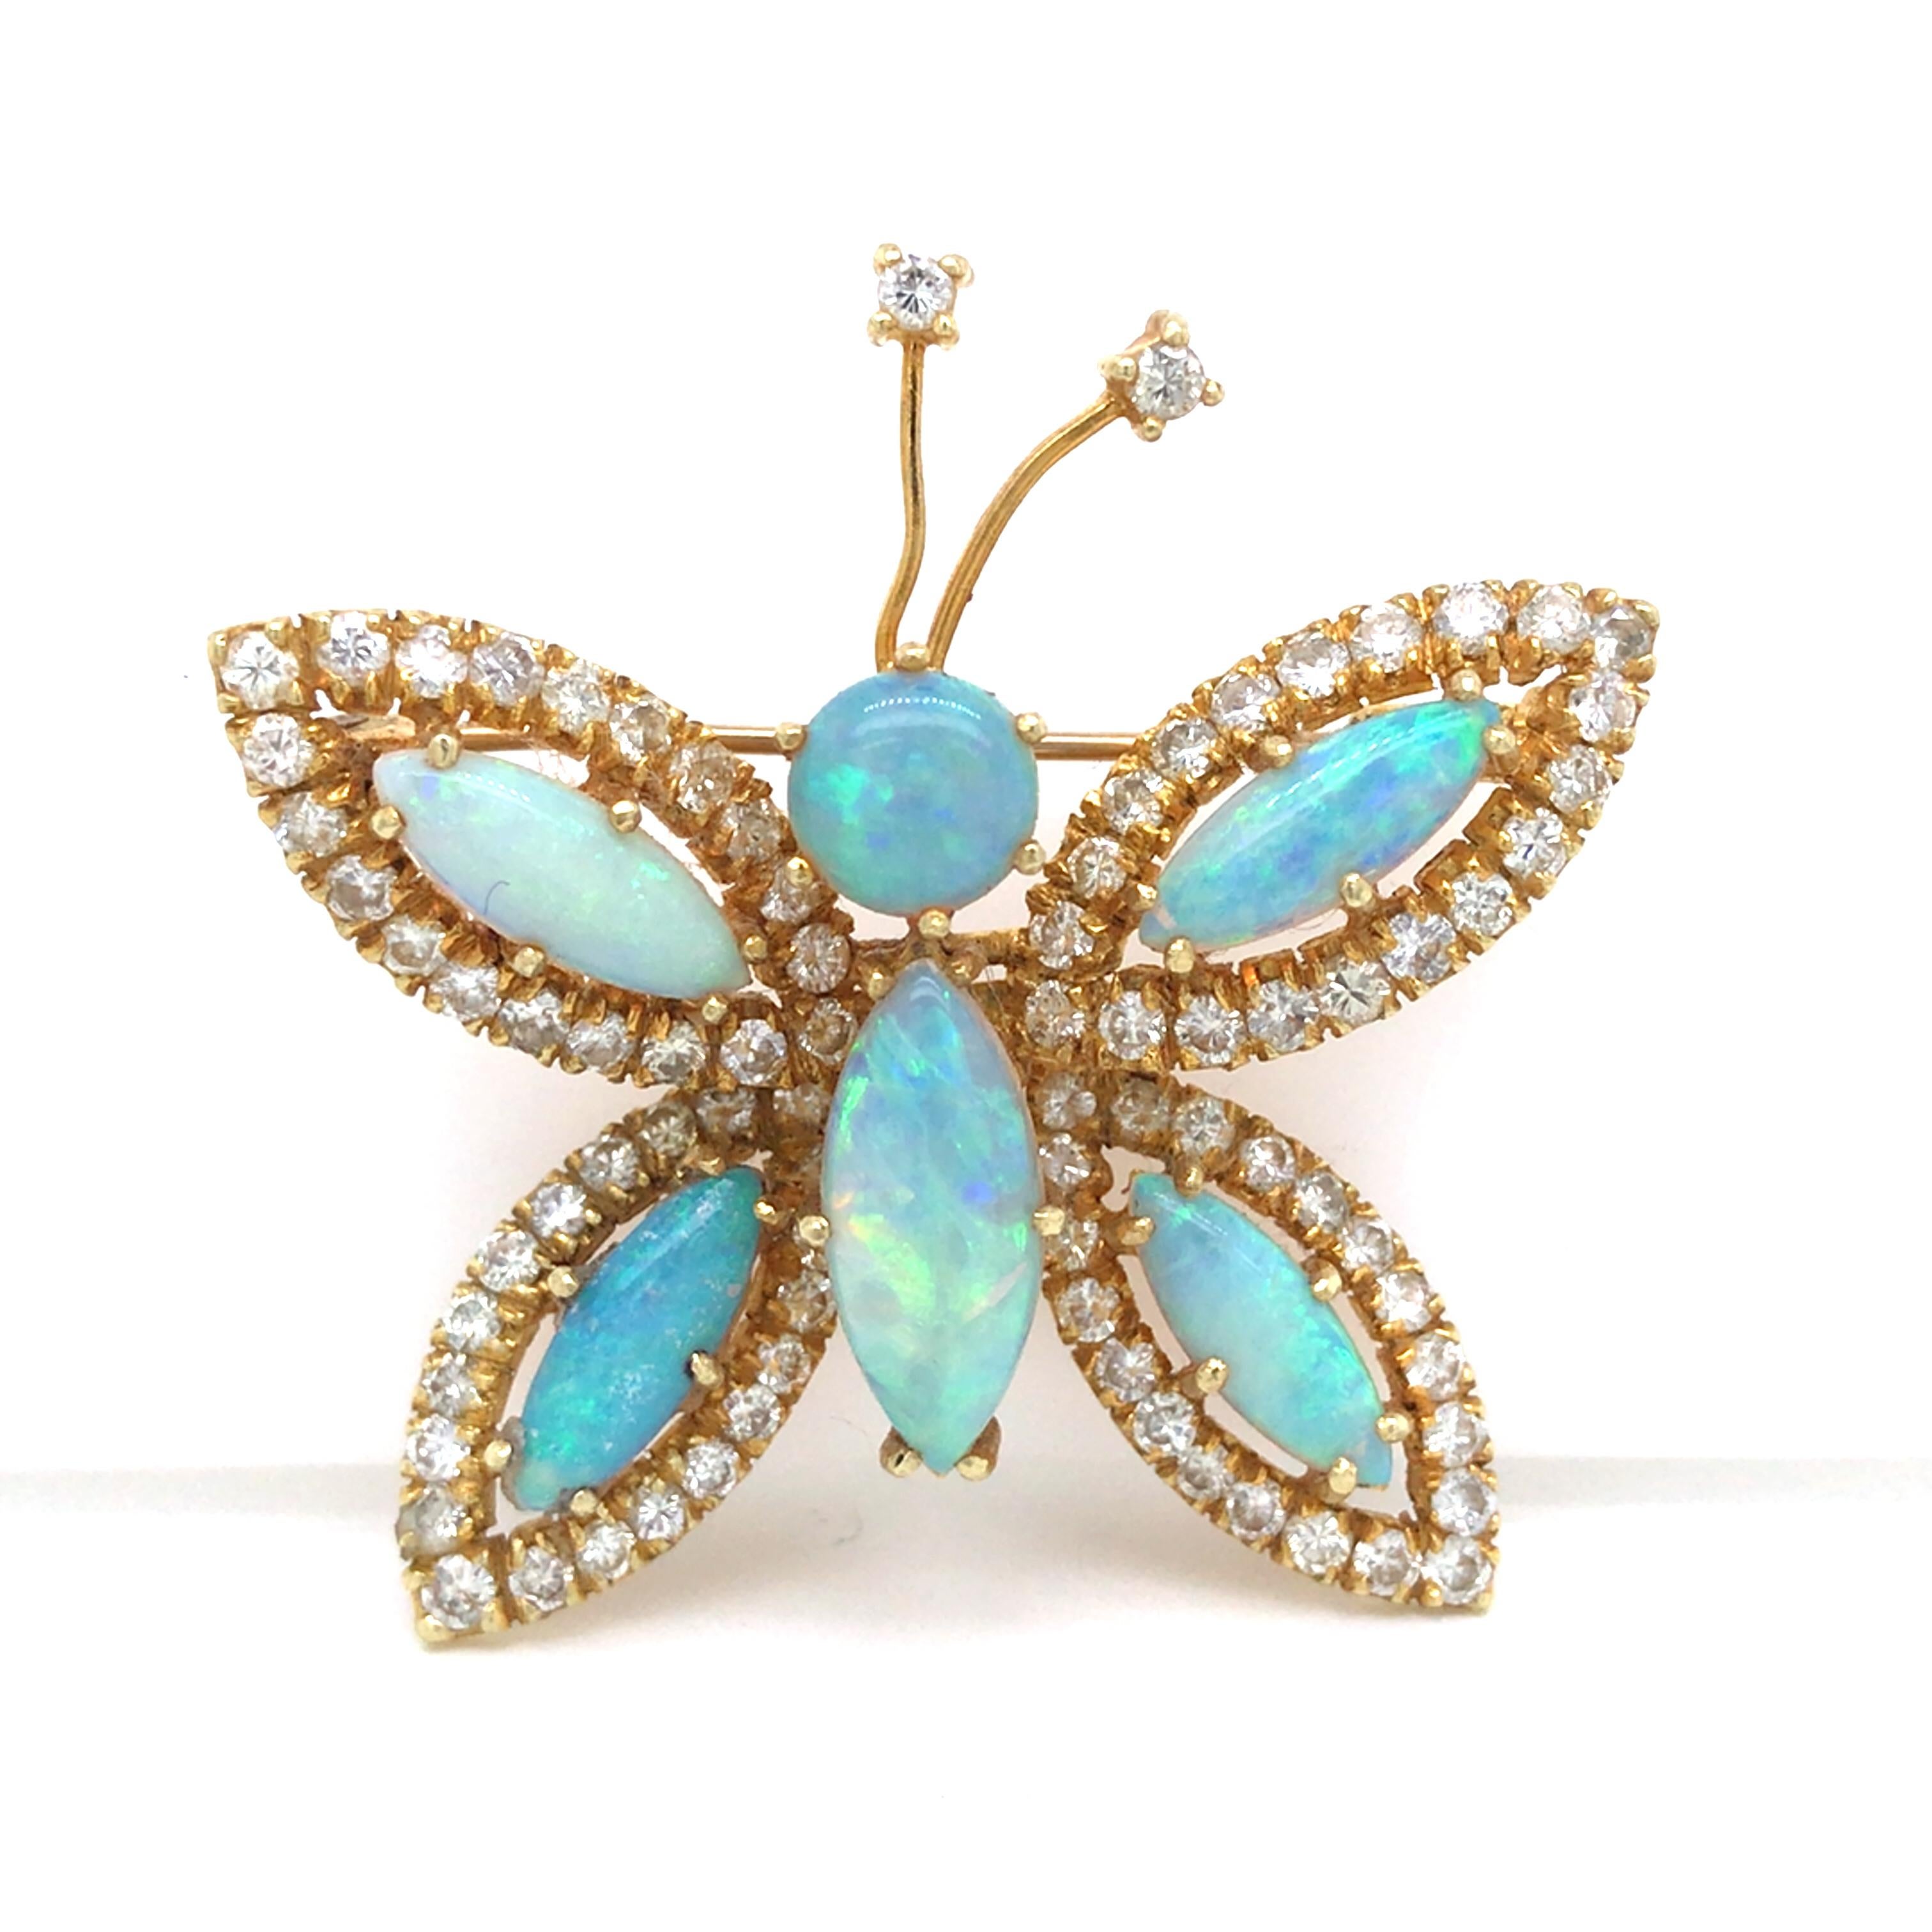 Hammerman Brothers Diamond Opal Butterfly Pin in 18K Yellow Gold.  Round Brilliant Cut Diamonds weighing 2.40 carat total weight, G-H in color and VS-SI in clarity are expertly set.  The Butterfly measures 1 1/2 inch in length and 1 5/8 inch in